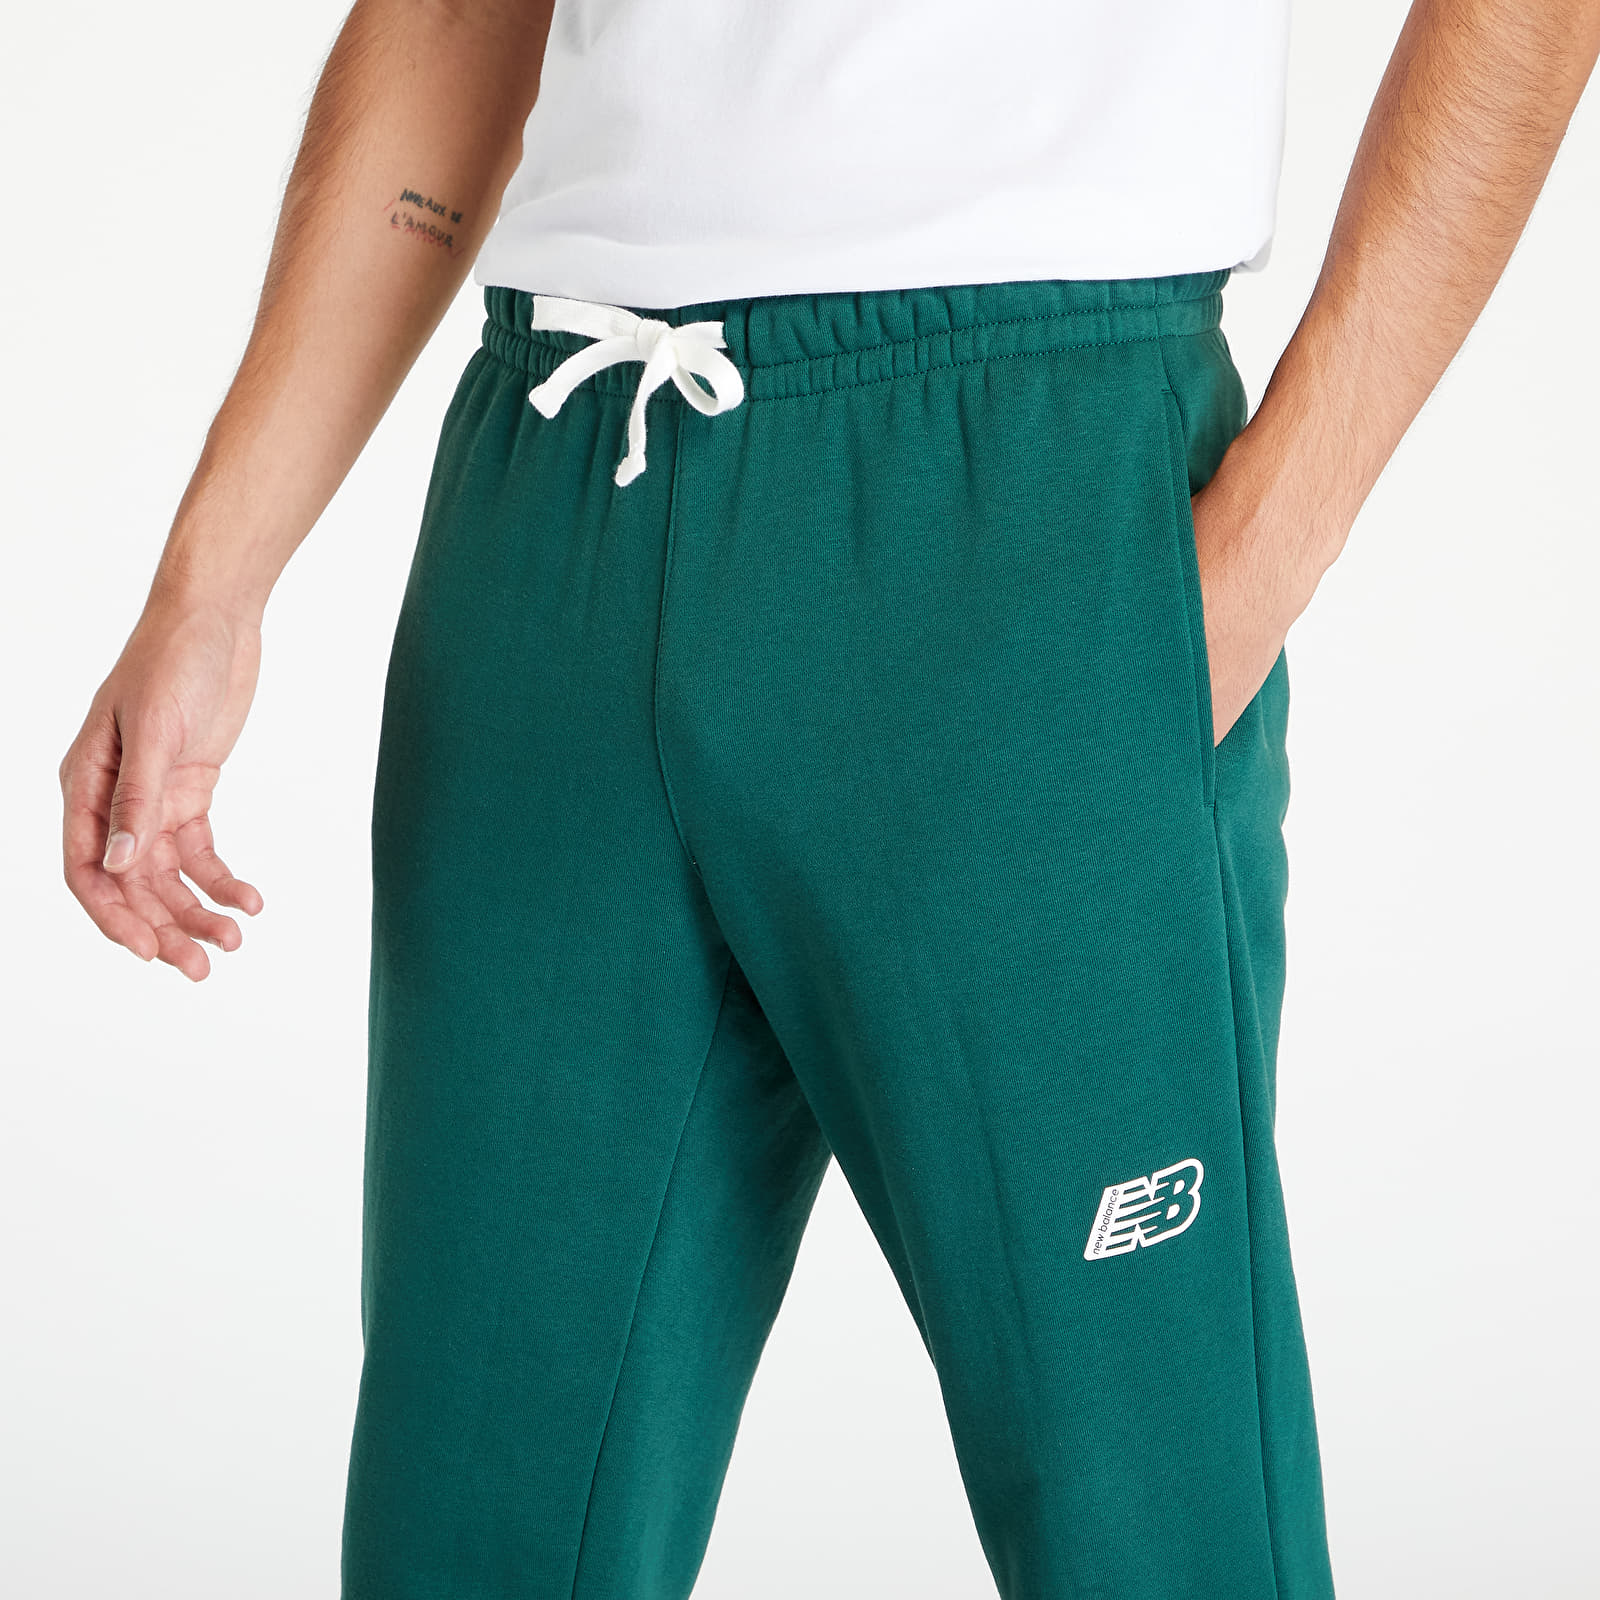 Footshop Magnify jeans Pants Fleece | Essentials New and Green Nightwatch Jogger Balance